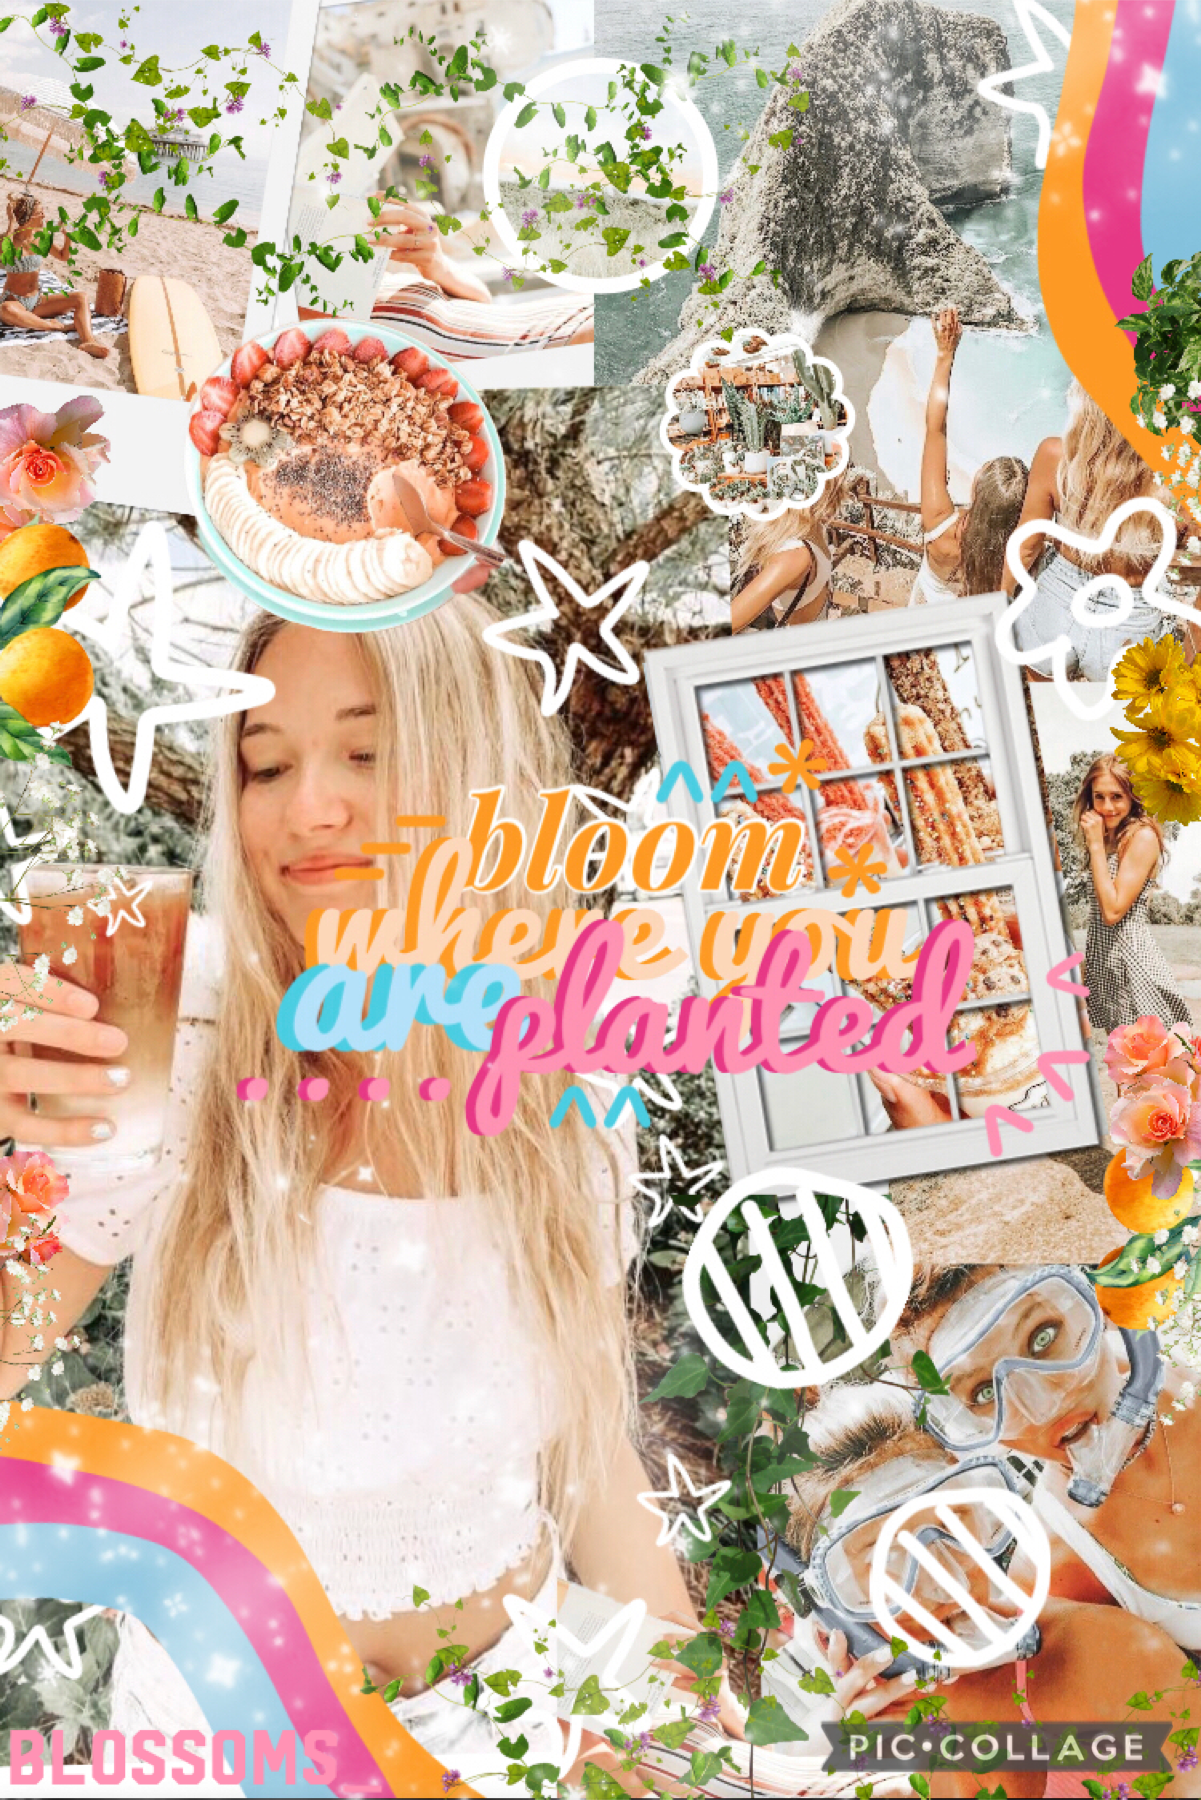 🌺 t a p 🌺
tbh I don’t know if I like this collage 🤔 It’s very cluttered haha. But I love this new summery theme!! 😍 does anyone want to colab?! I think that would be funn. Anyways I finished ST vol. 2 yesterday and was literally sobbing 😭 but it was also 